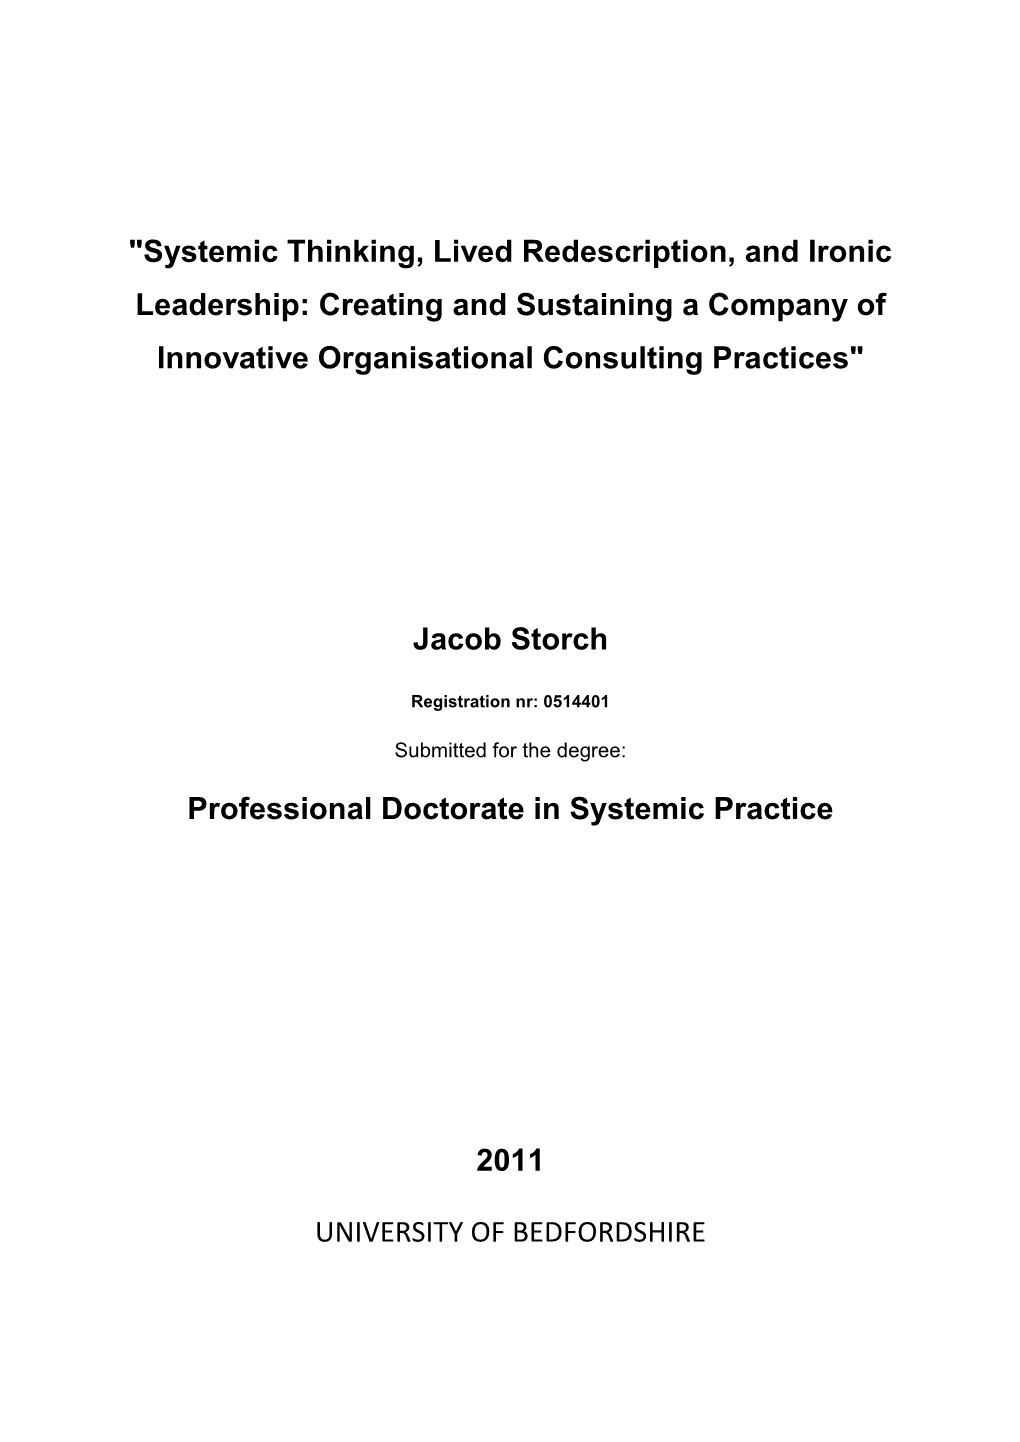 "Systemic Thinking, Lived Redescription, and Ironic Leadership: Creating and Sustaining a Company of Innovative Organisational Consulting Practices"